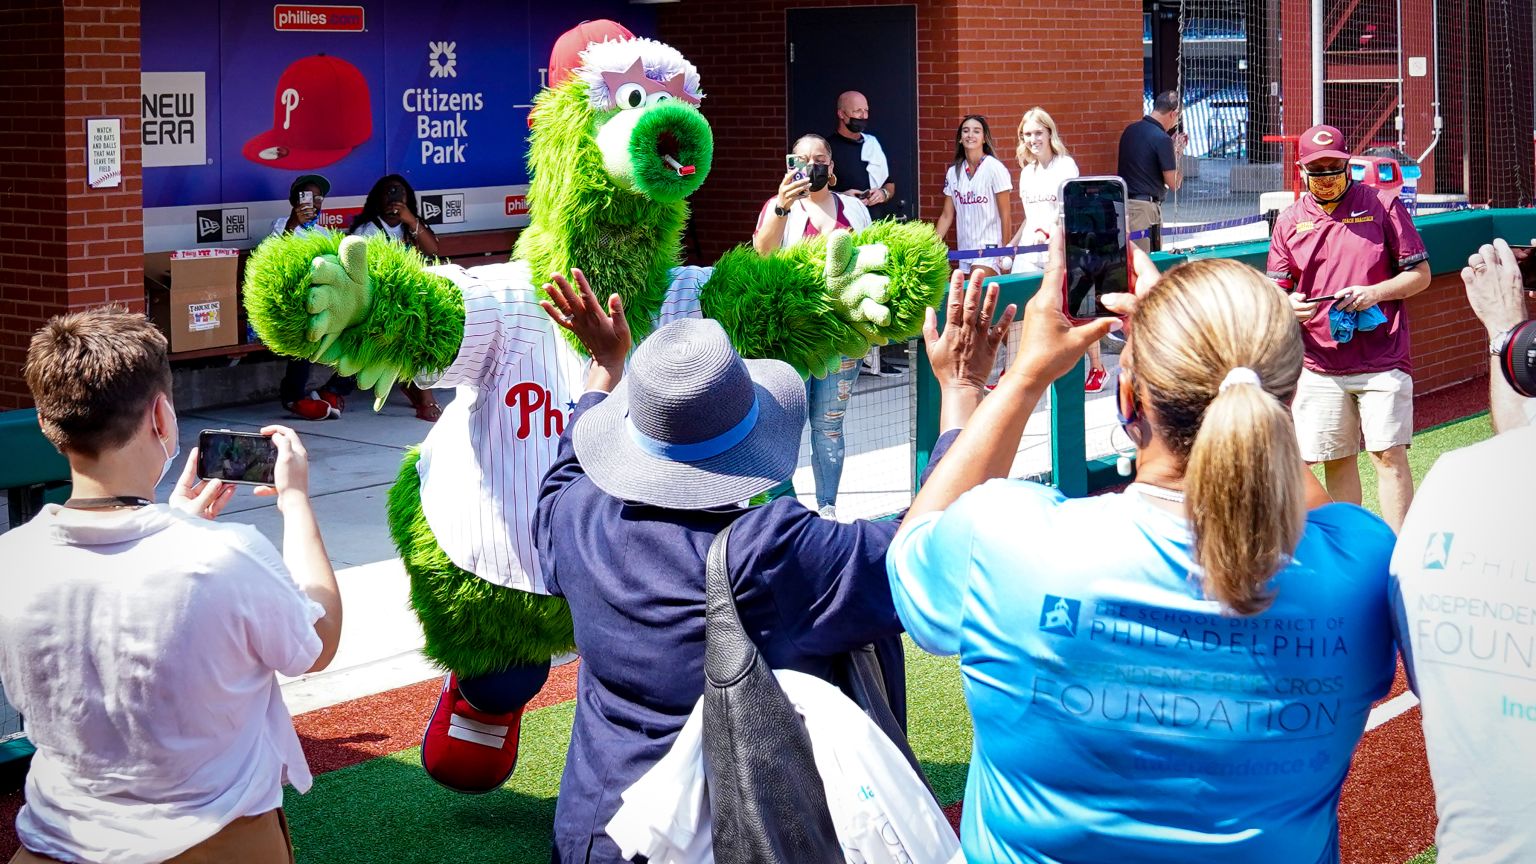 Ring the Bell Campaign Goes to Citizens Bank Park